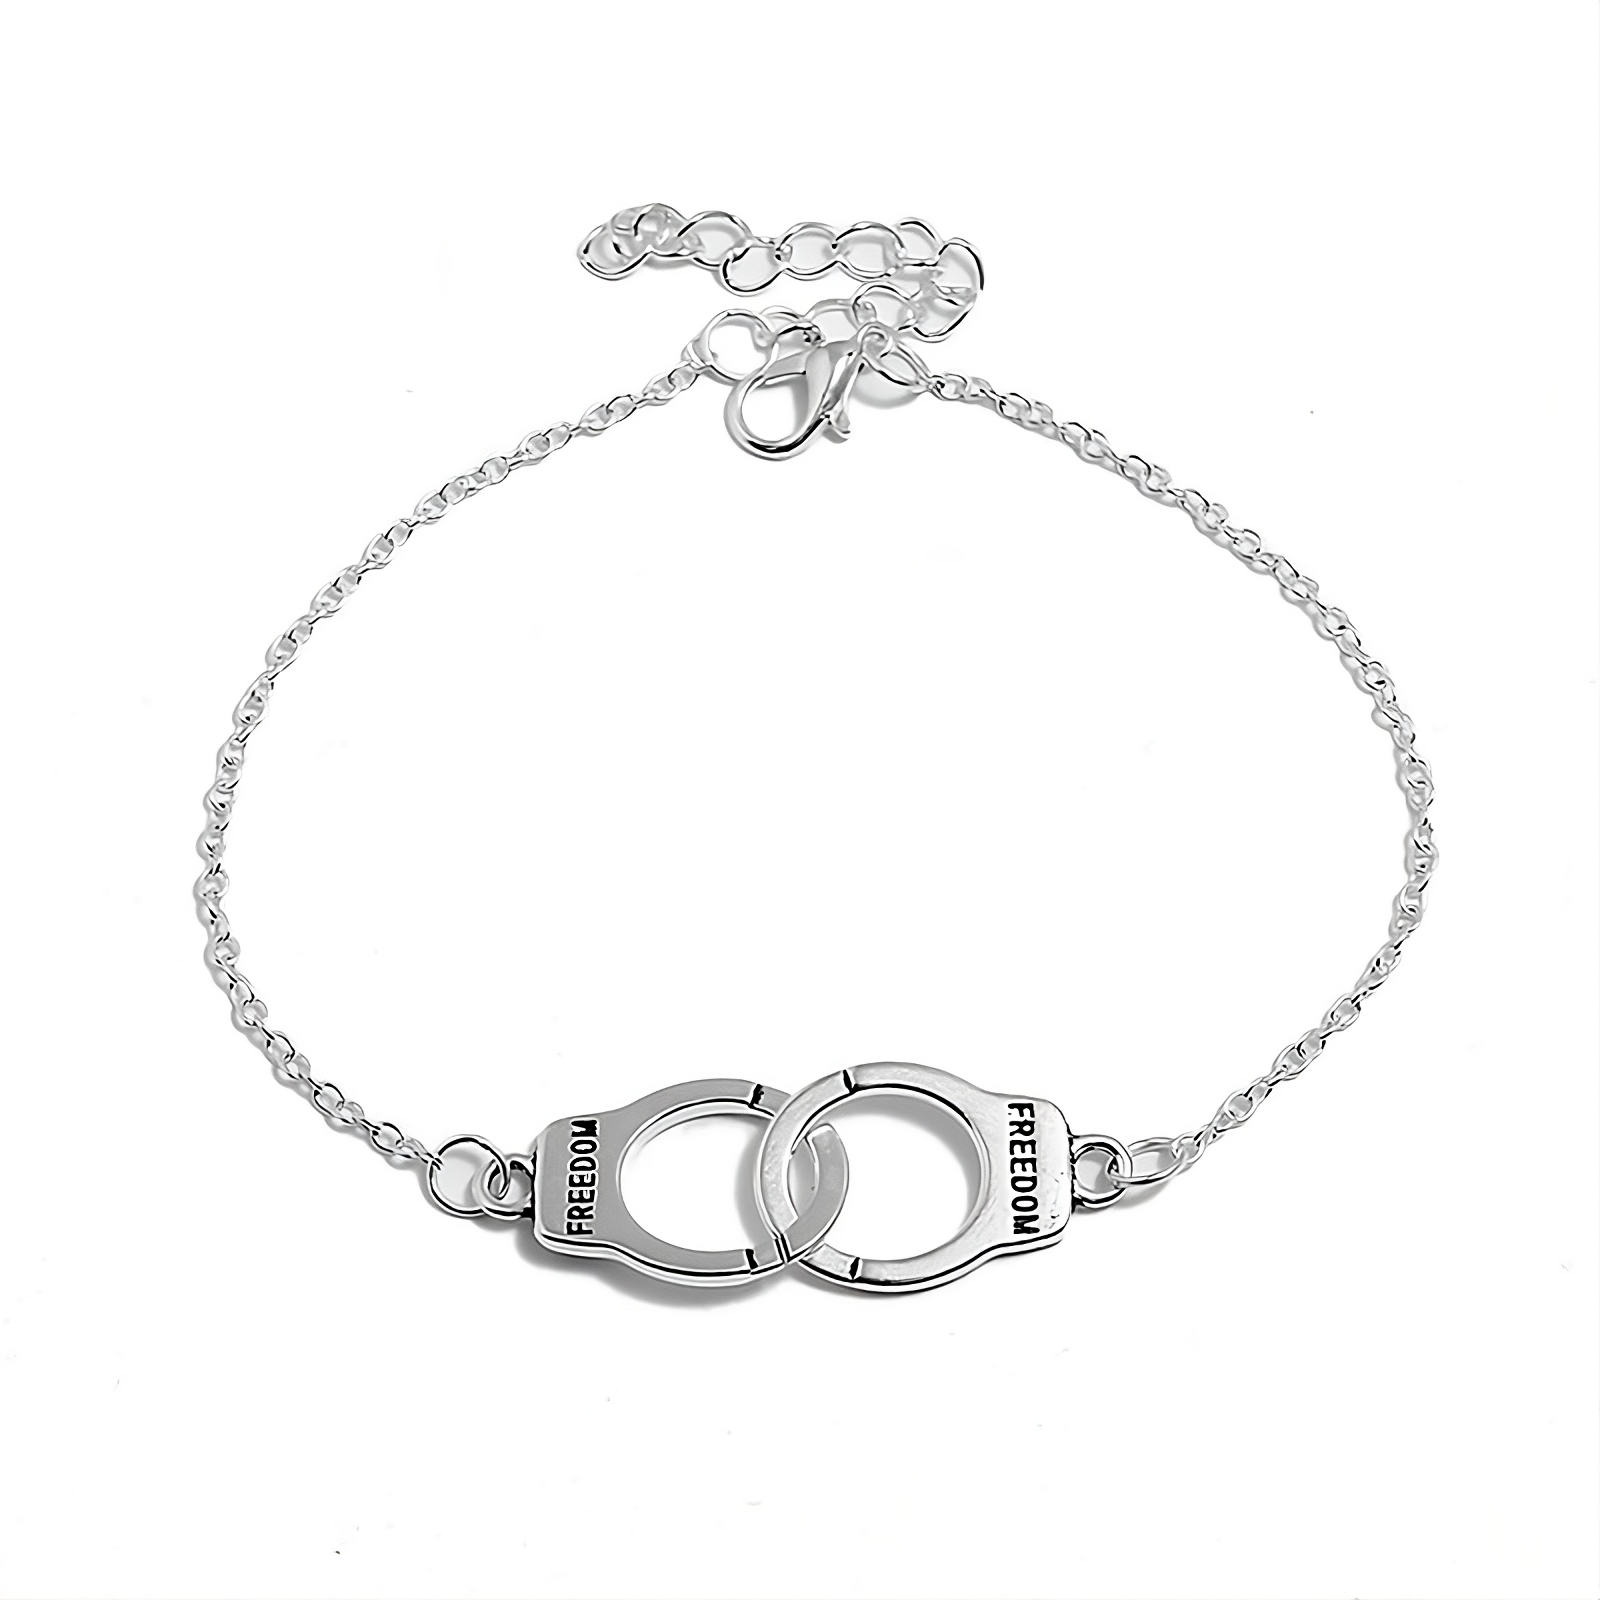 Chained Handcuff Anklets